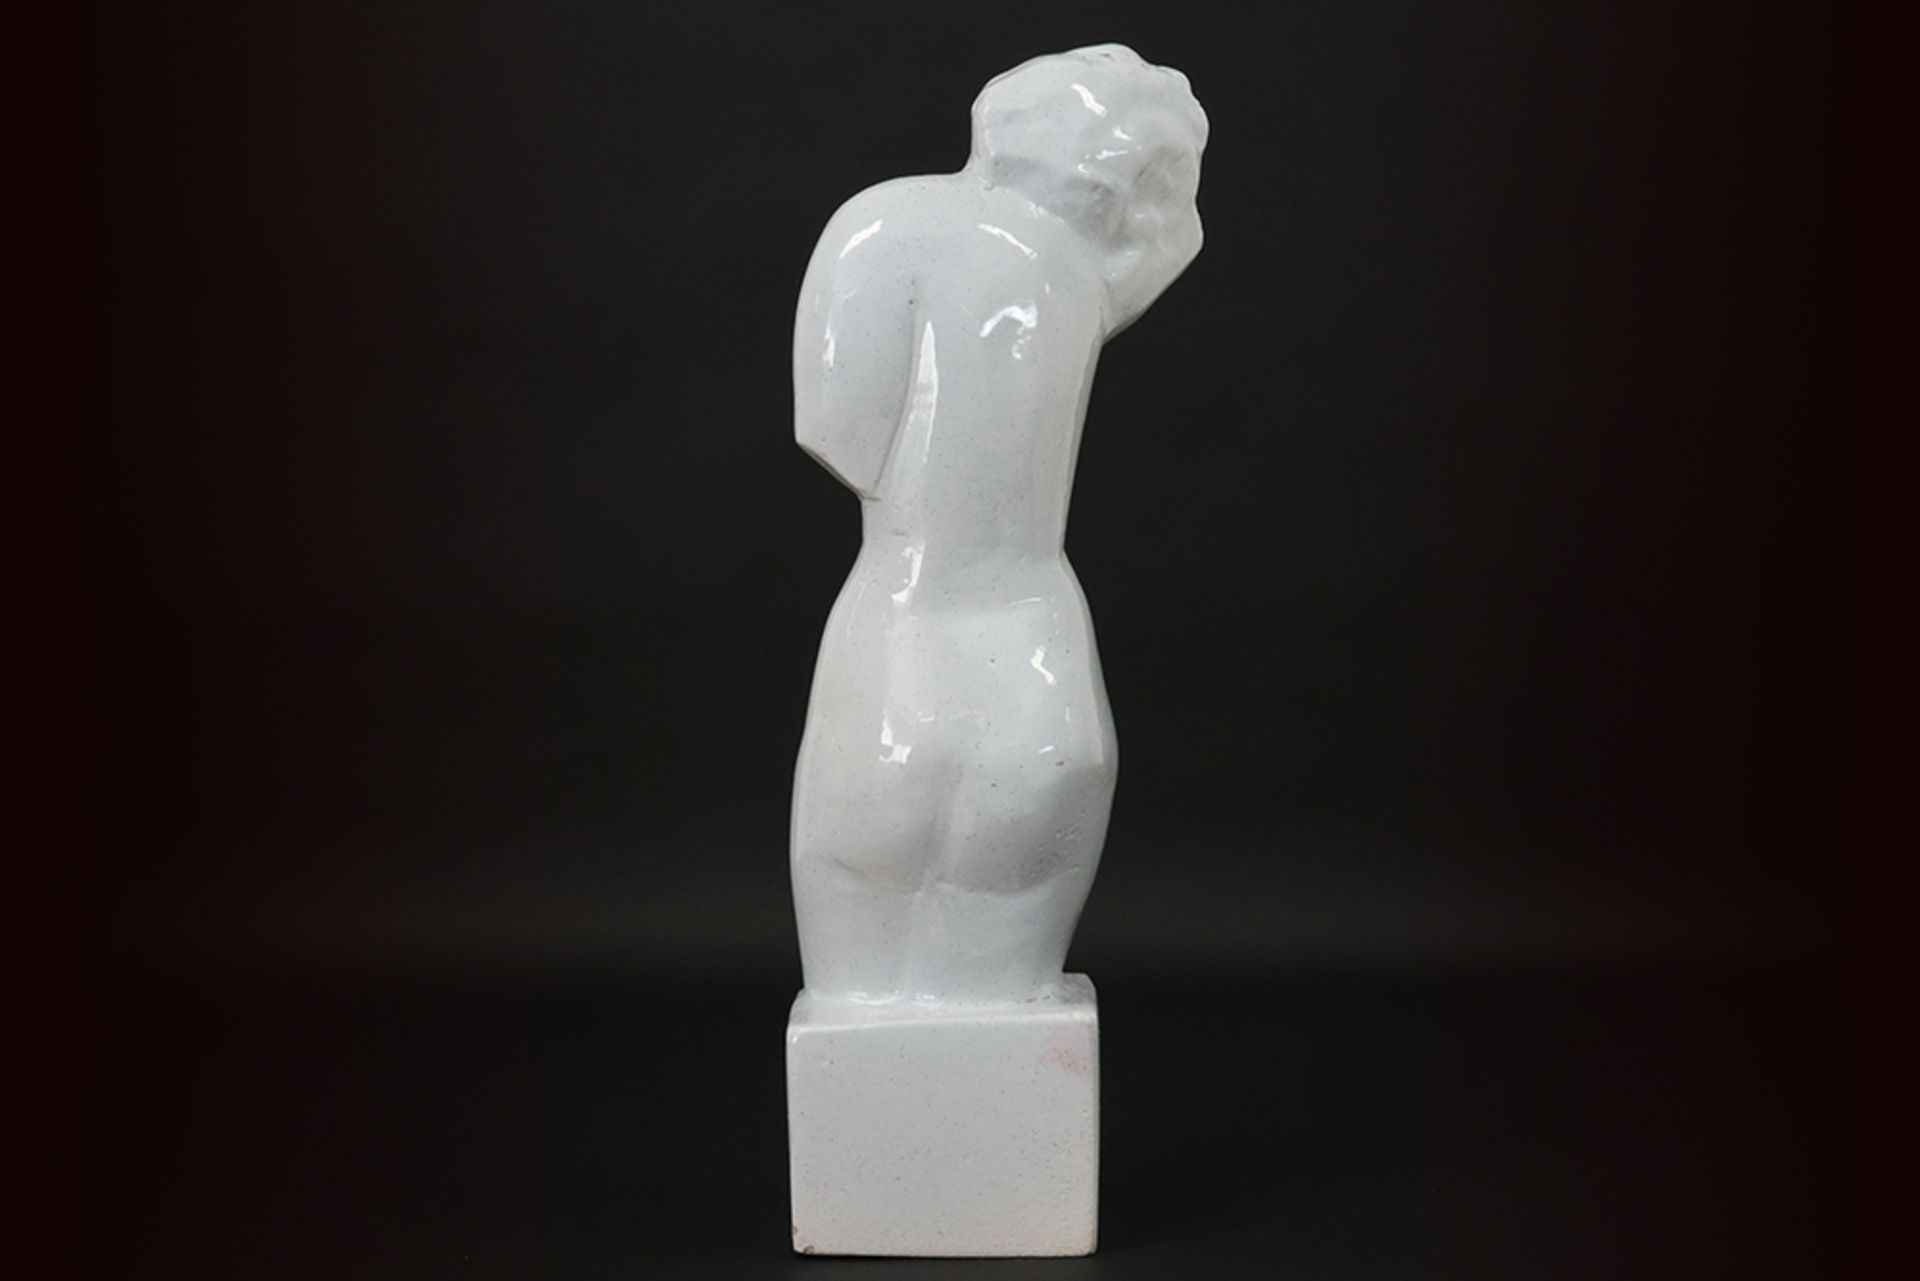 20th Cent. Belgian sculpture in glazed ceramic - signed Jan Cockx || COCKX JAN (1891 - 1976) - Image 3 of 4